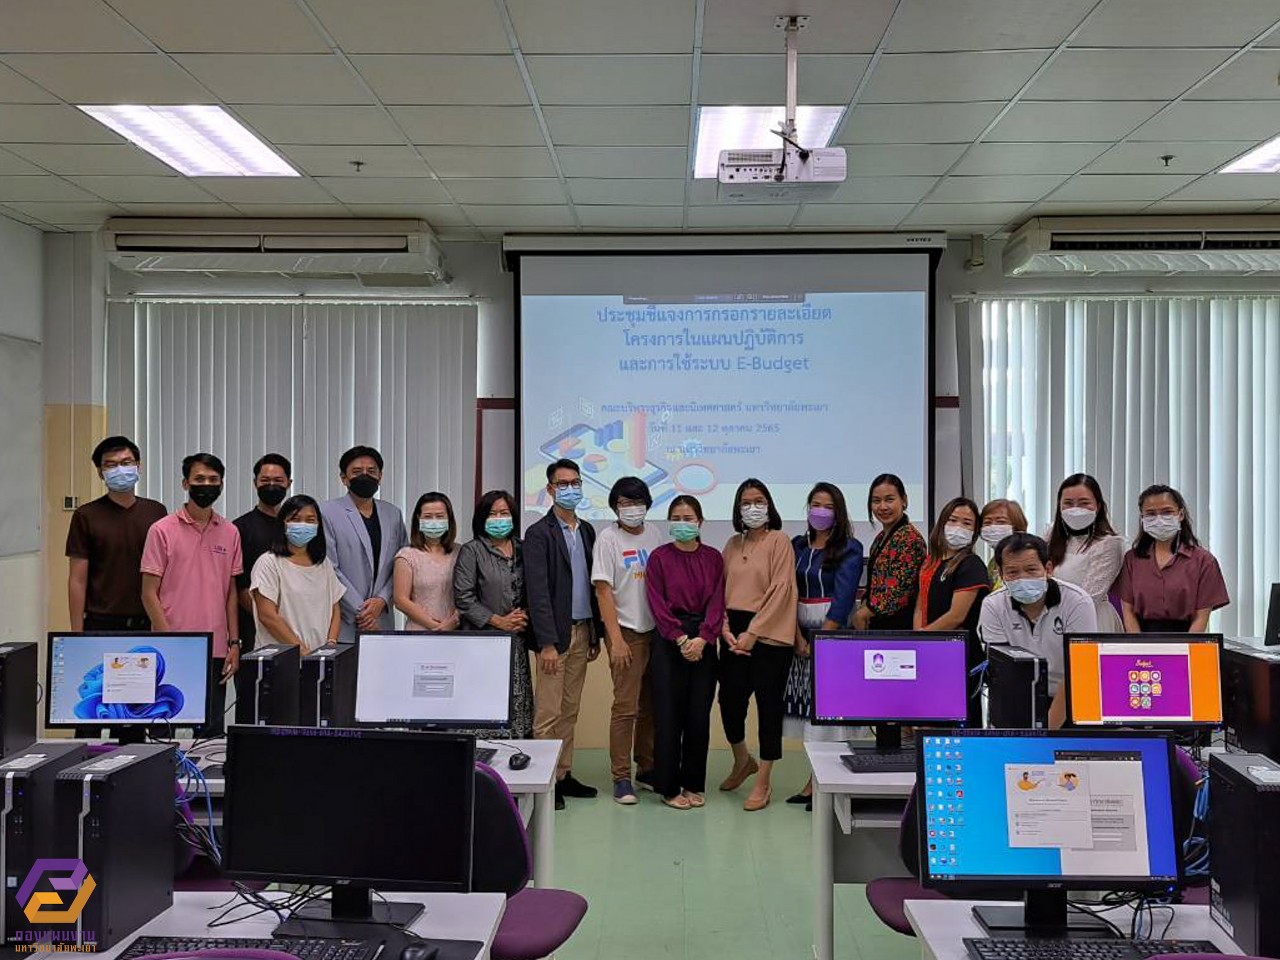 The Planning Division was honored to be a lecturer to provide knowledge on planning and budget management systems (e-Budget) to personnel of the Faculty of Business Administration and Communication Arts.